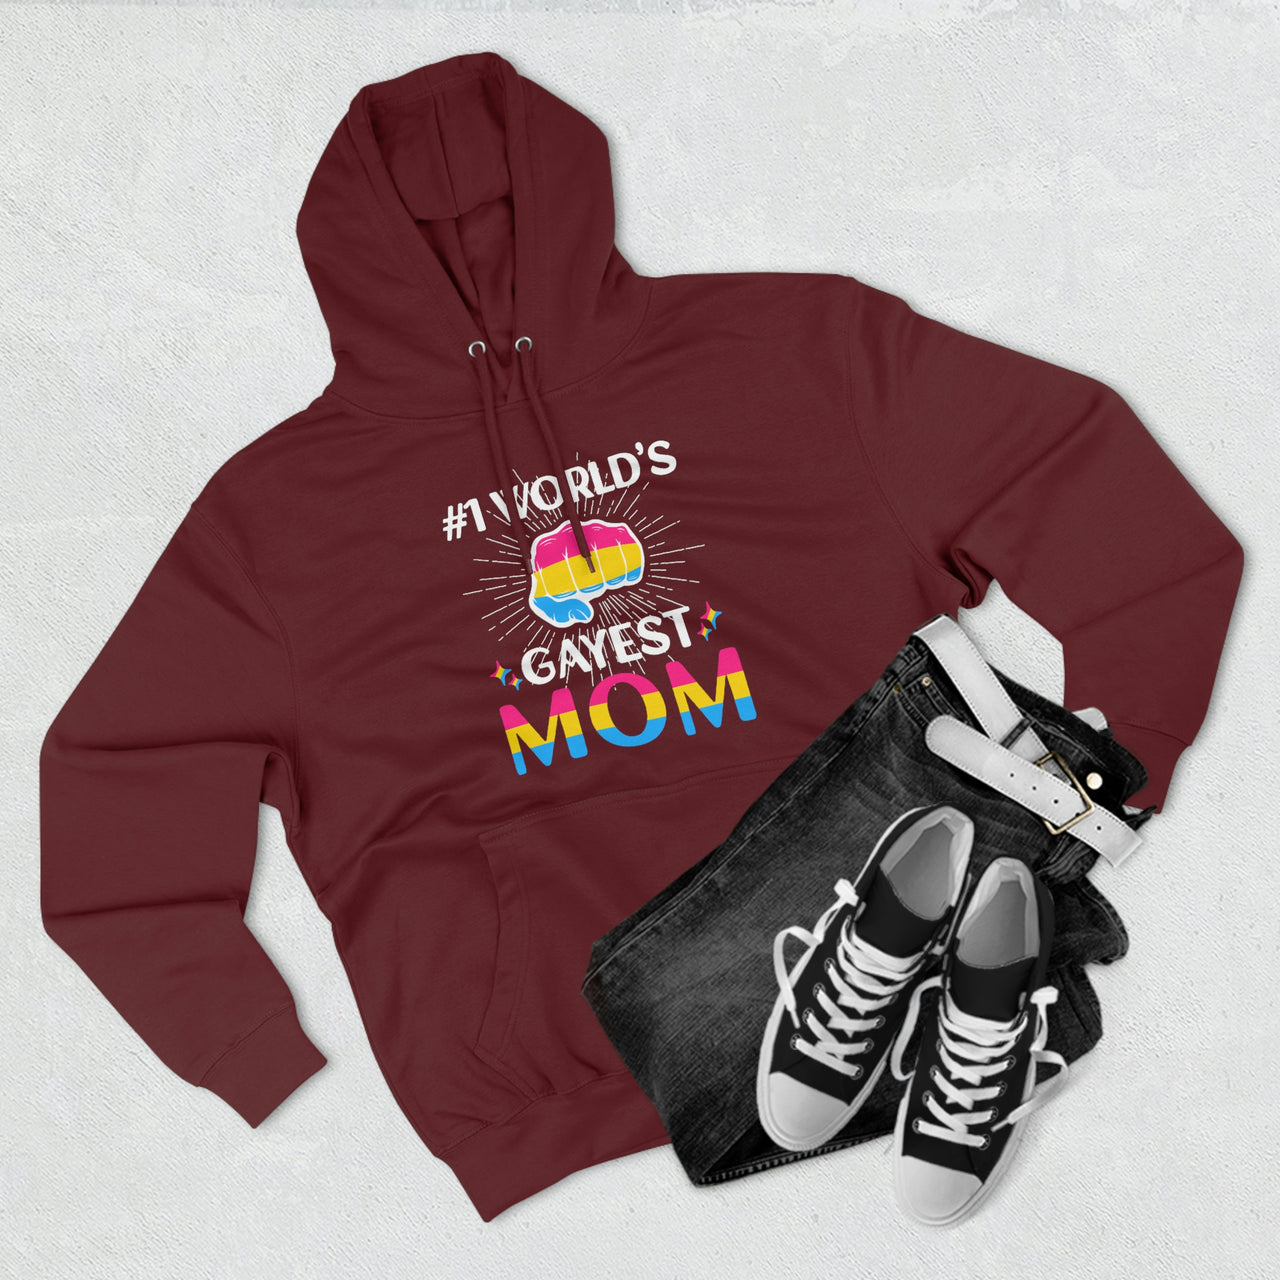 Pansexual Flag Mother's Day Unisex Premium Pullover Hoodie - #1 World's Gayest Mom Printify